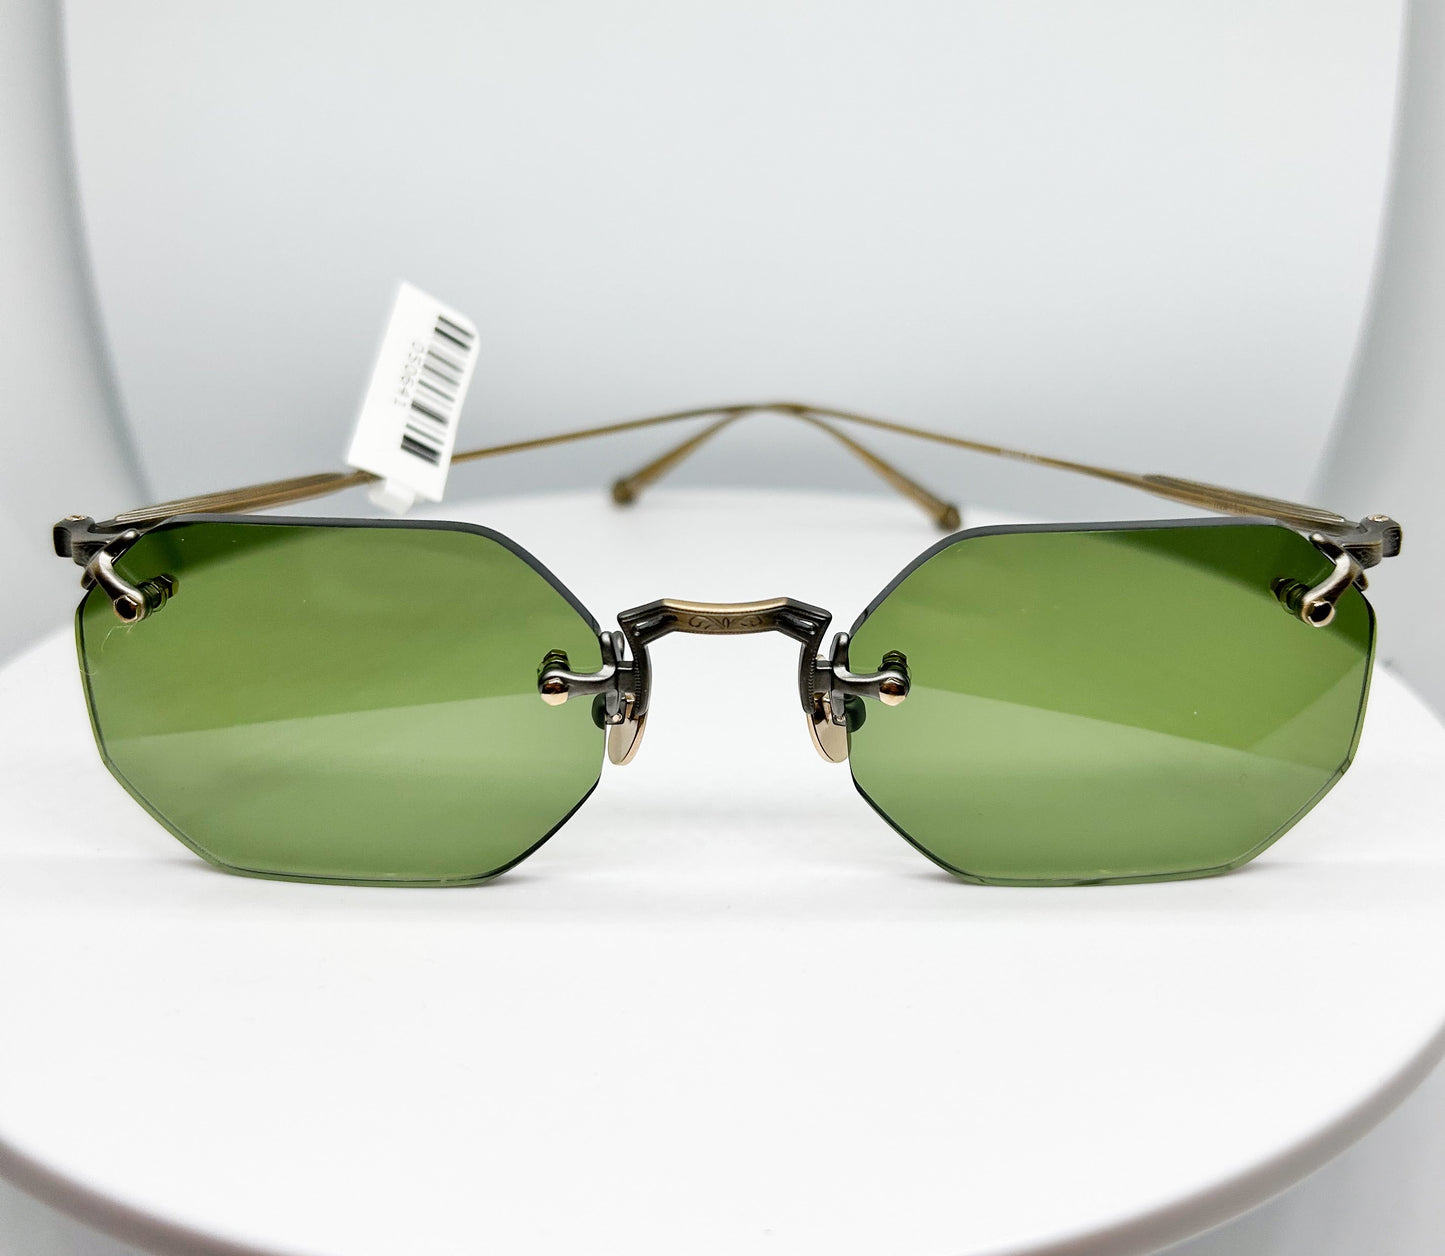 <p>Matsuda M3104 is a  Green, Antique Gold, Rimless Sunglasses Frame with a Rectangular shape.</p><p>Shop with confidence from Adair Eyewear, a MATSUDA Authorized Dealer.  We have provided the best in customer service and great designer eyweear for over 40 years.</p>